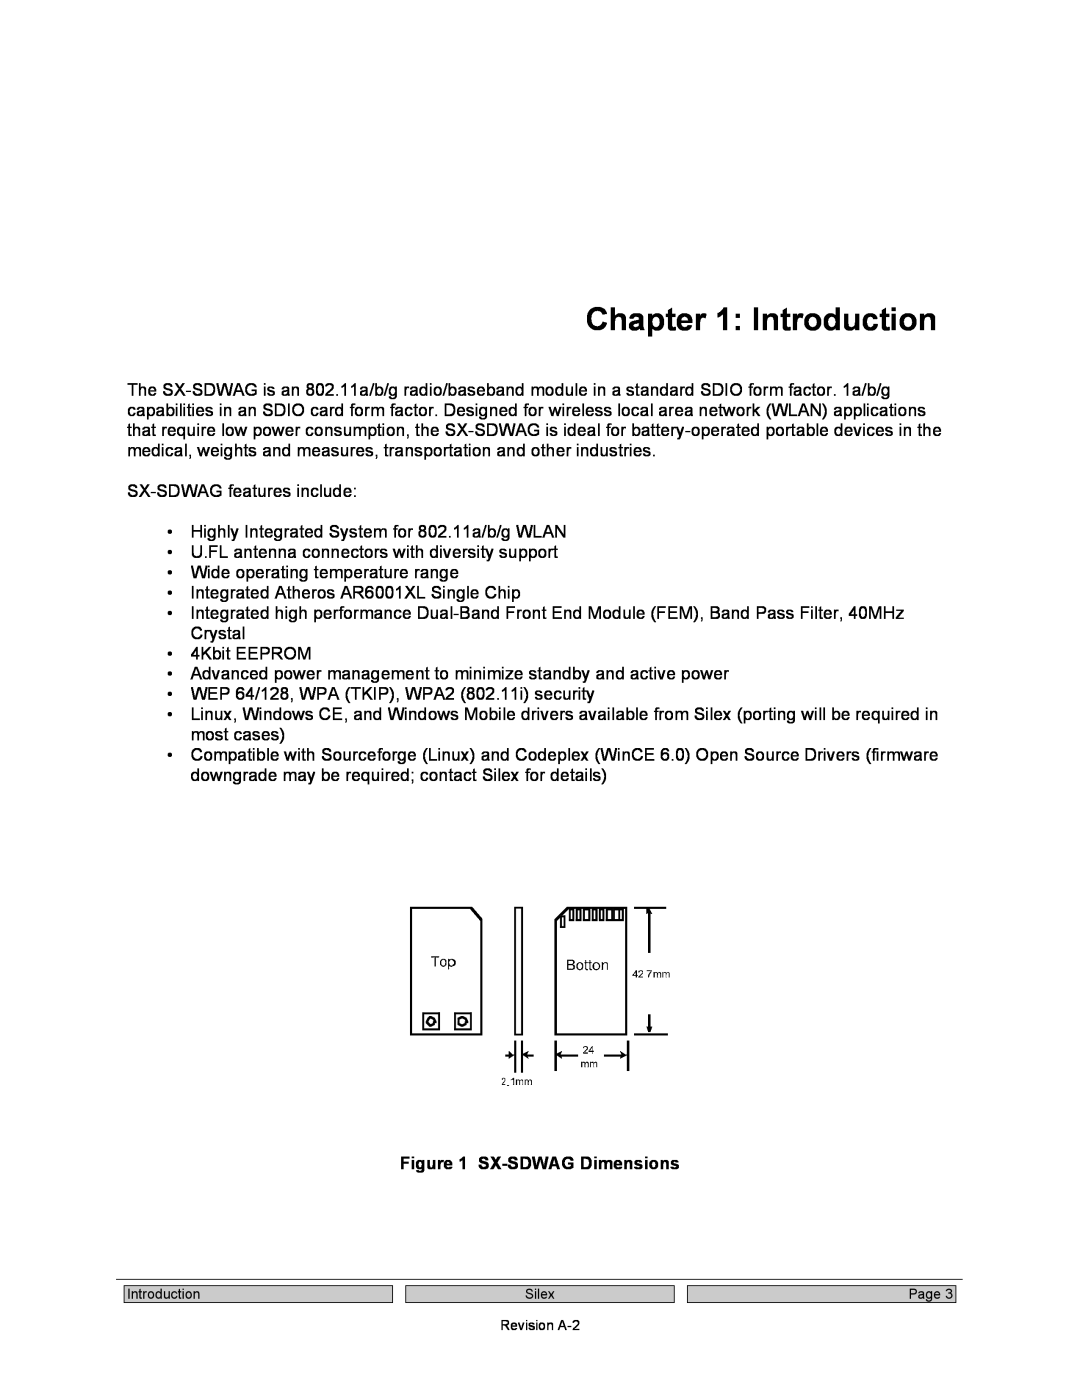 Silex technology user manual Introduction, SX-SDWAG Dimensions 